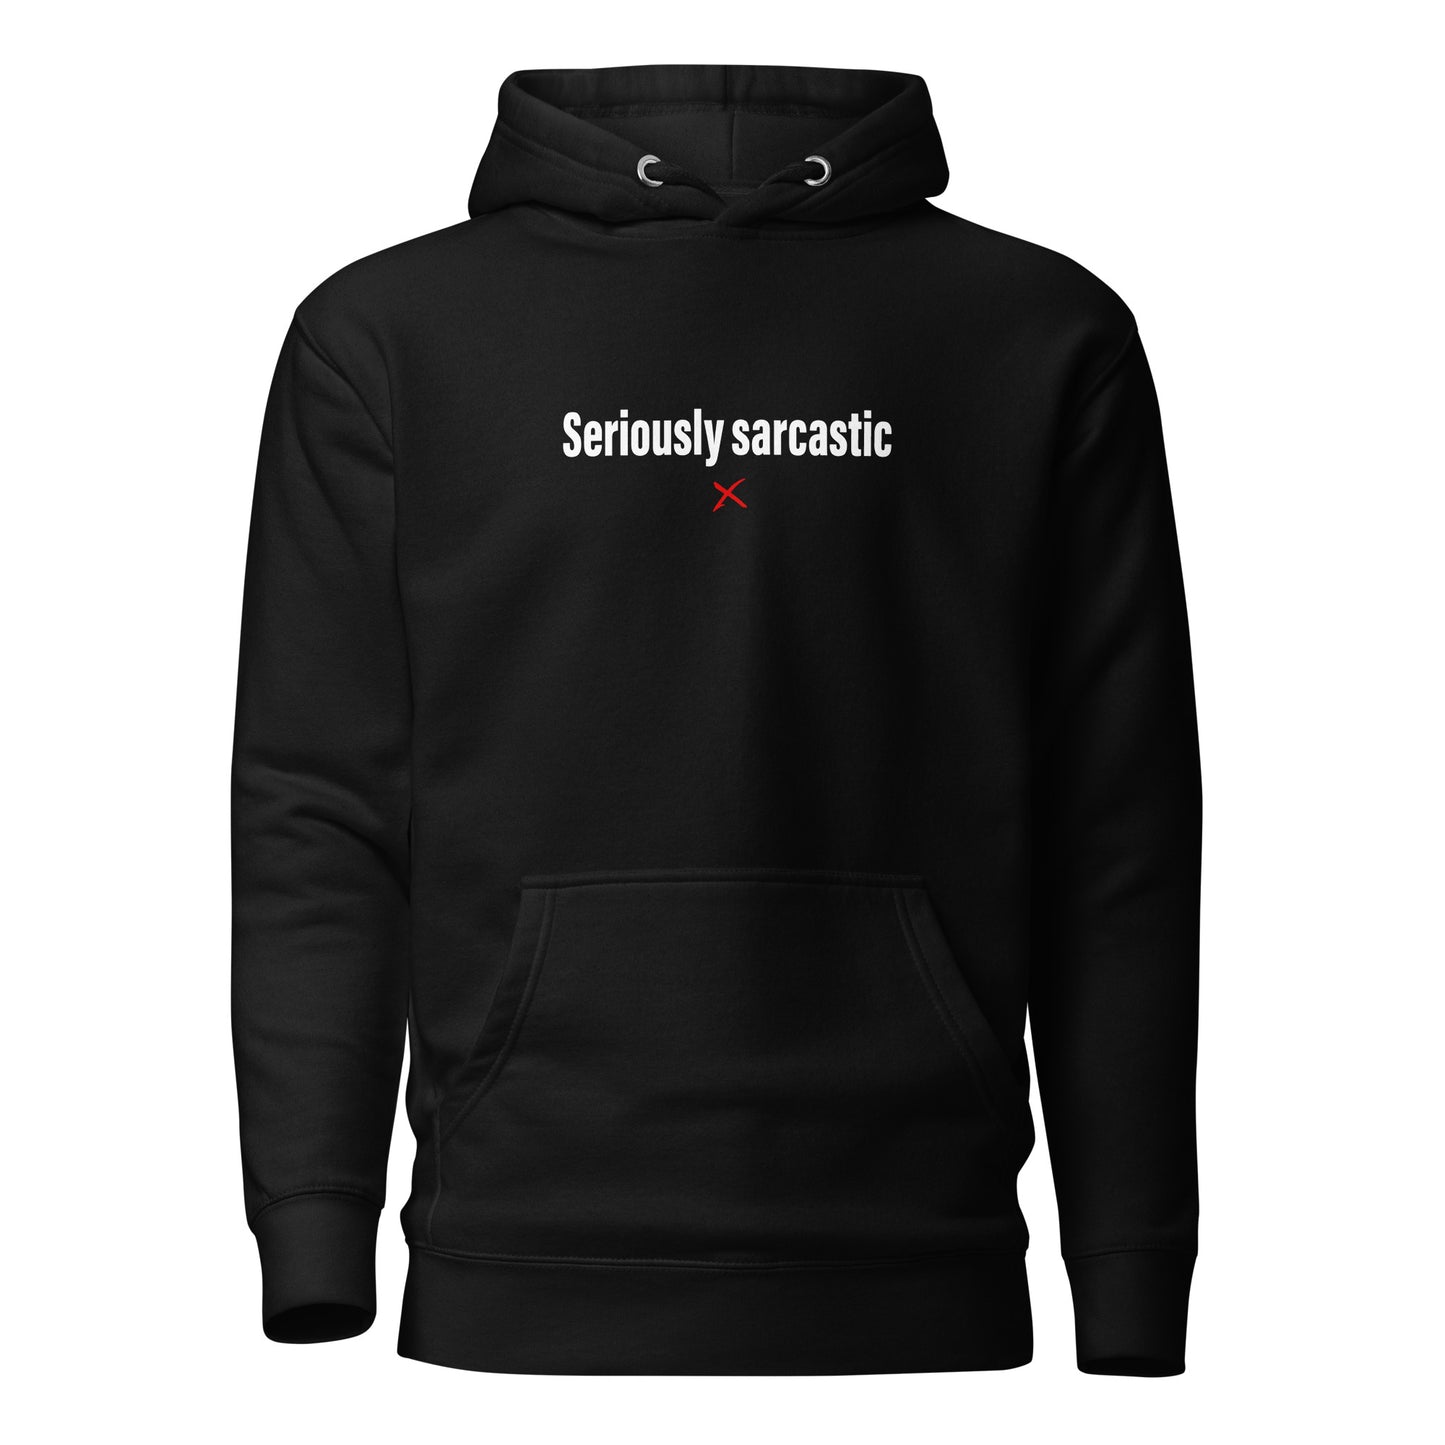 Seriously sarcastic - Hoodie